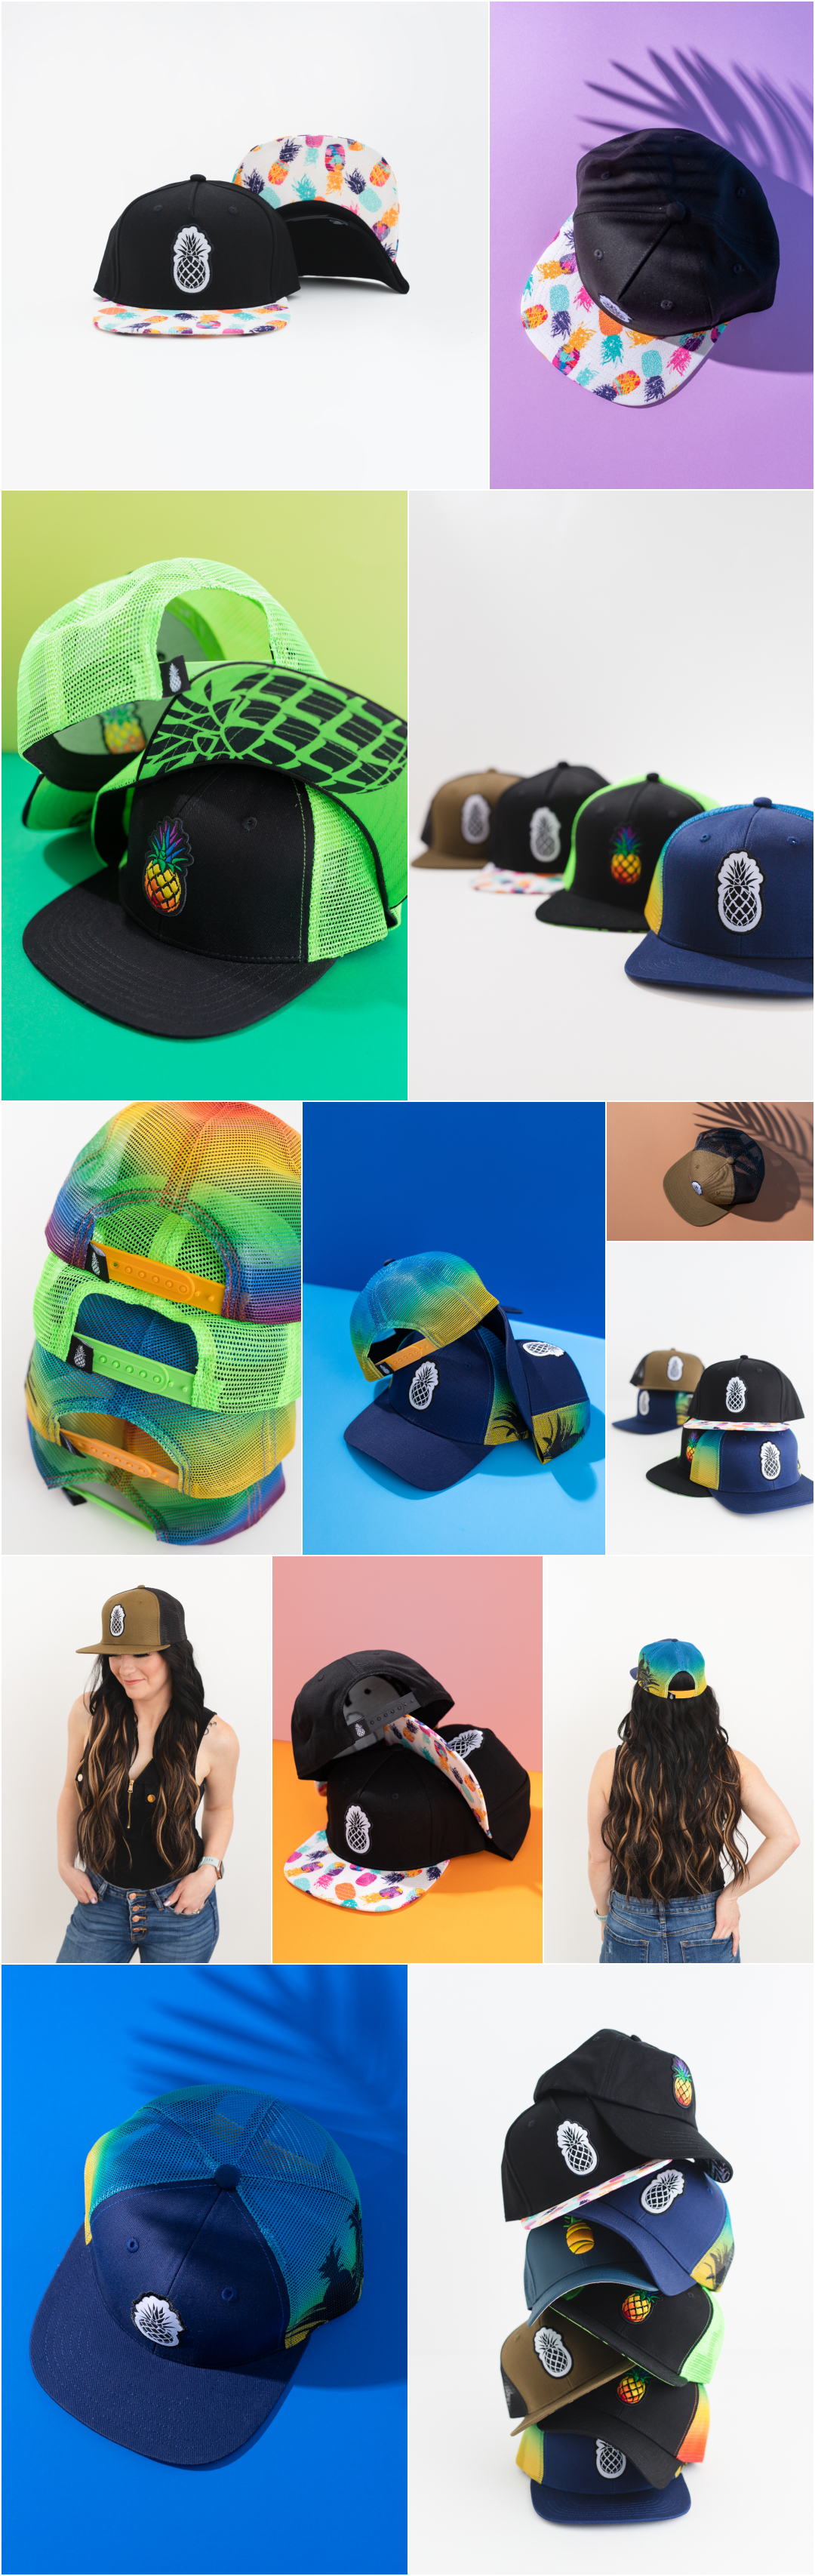 Hat Product Photography - Creative Product Photographer